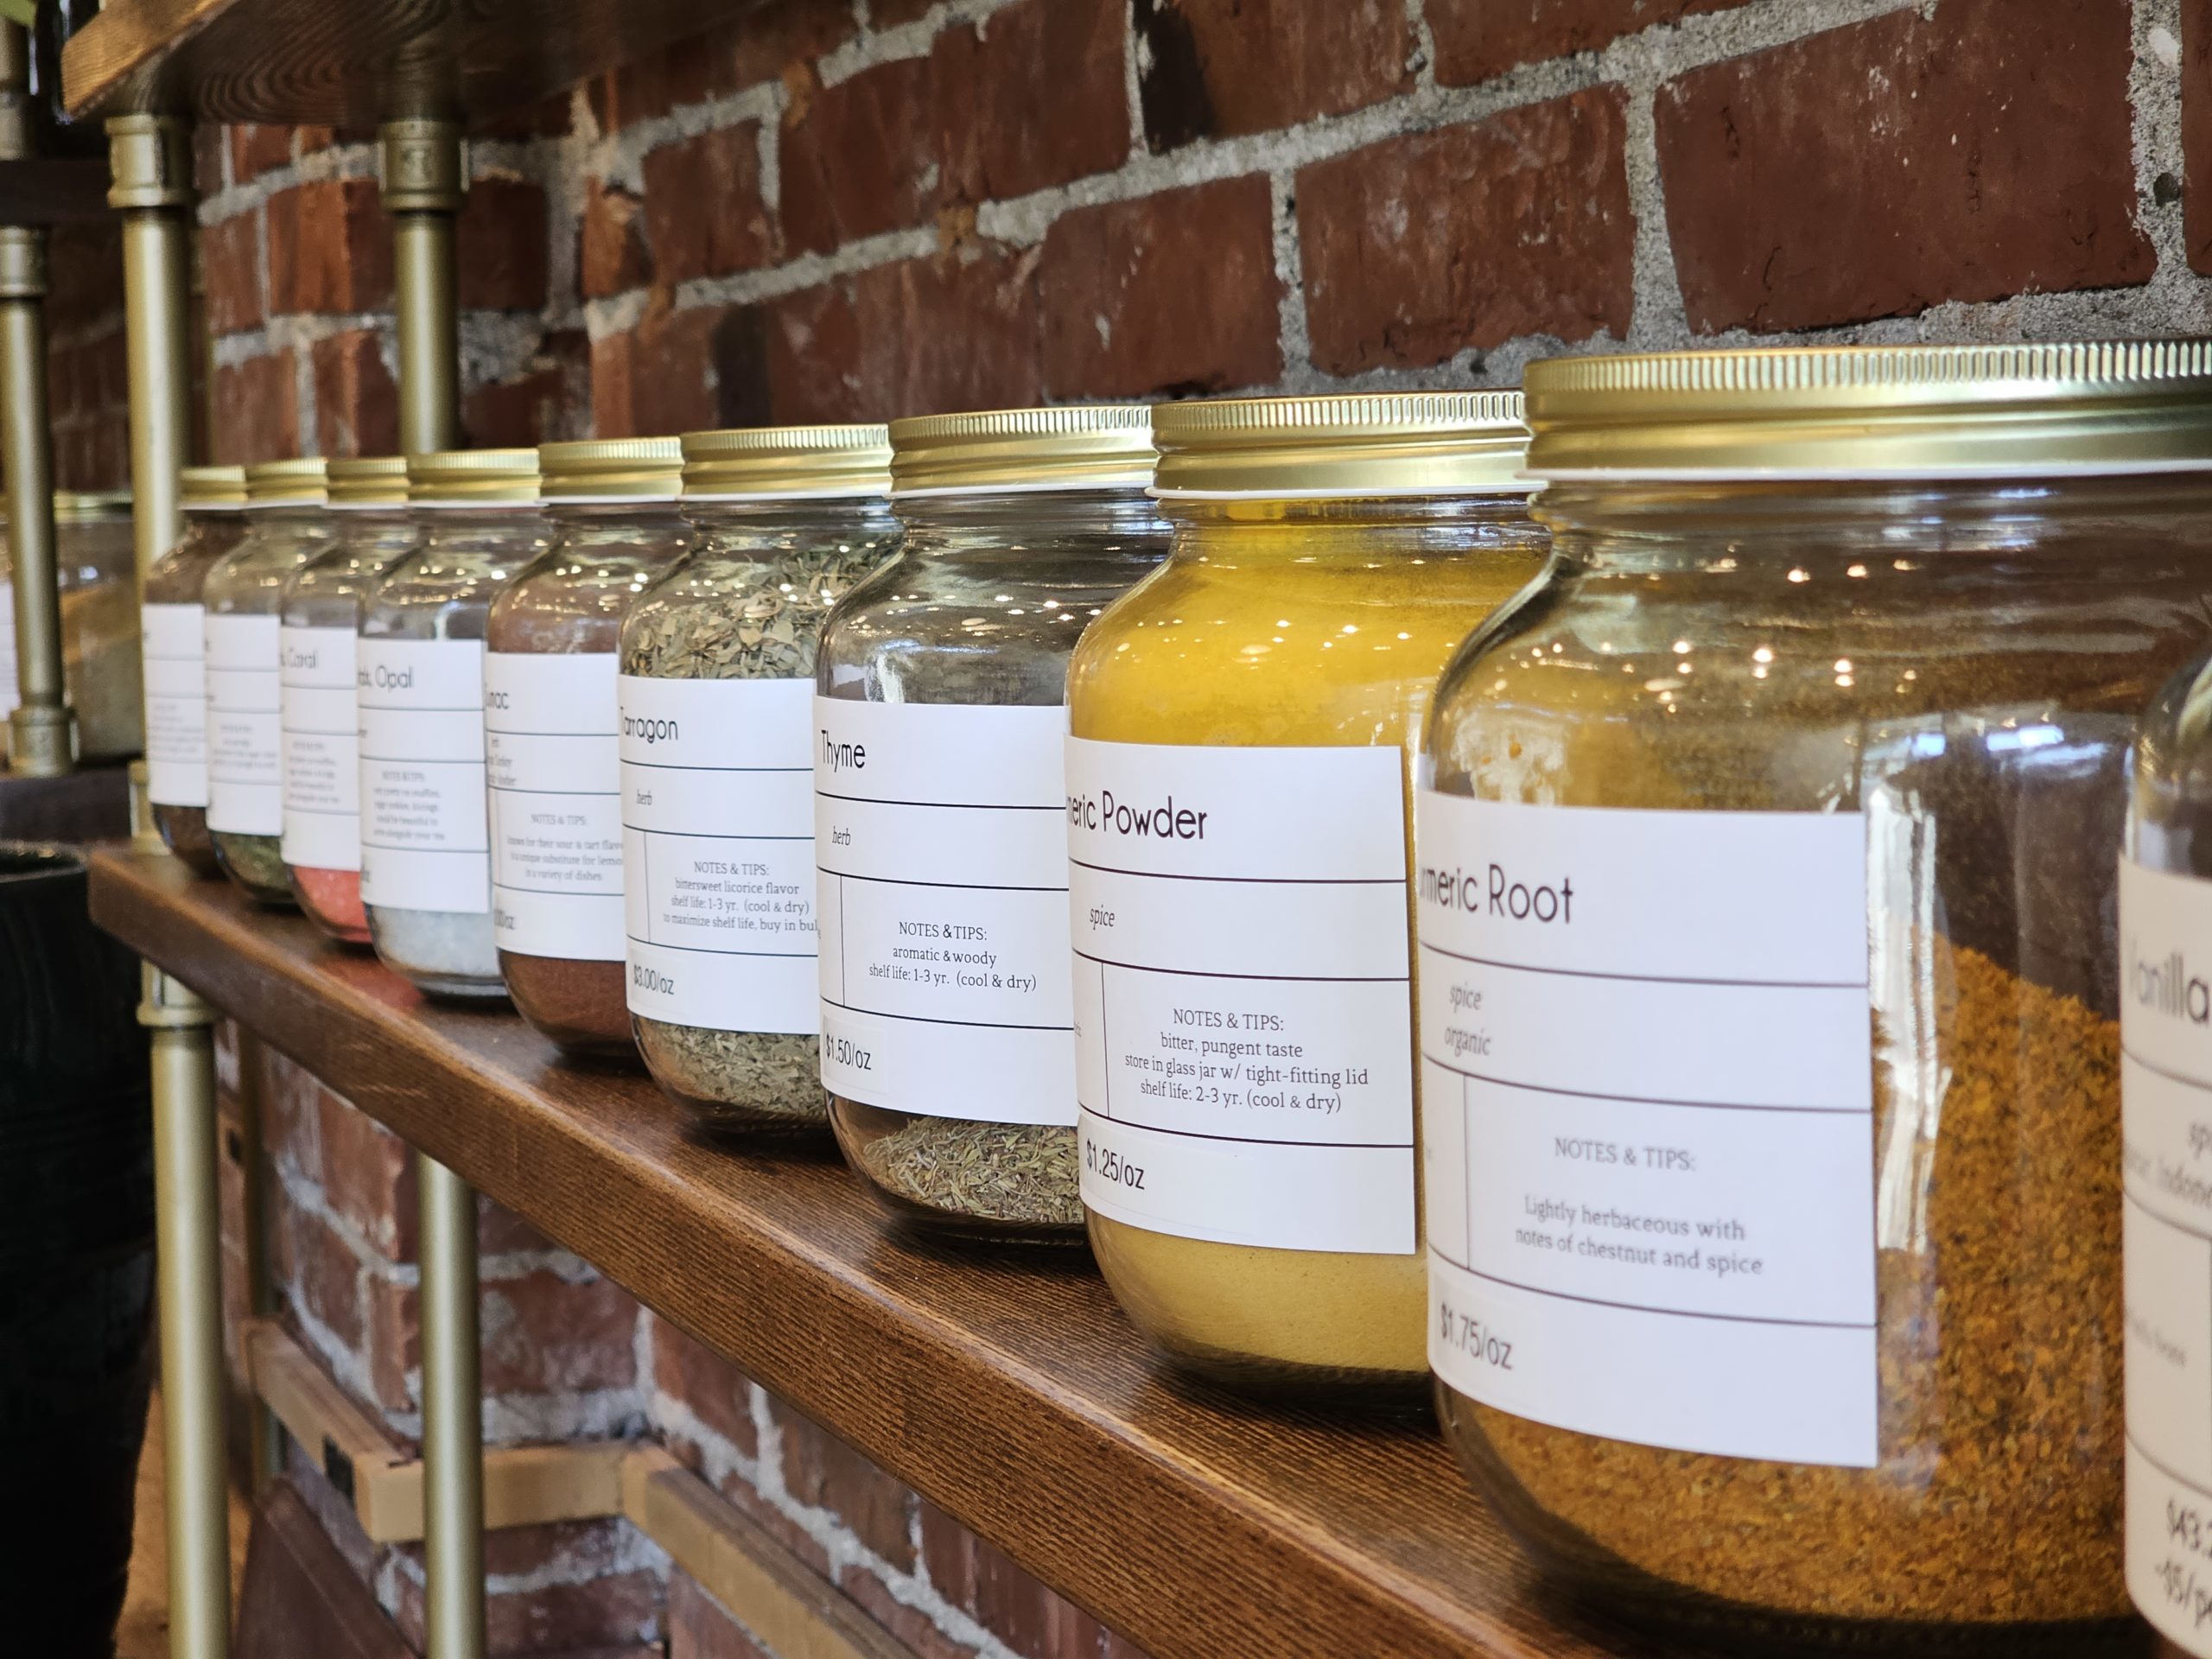 a row of glass jars full of colorful spices, with white labels and gold lids, sitting on a wooden shelf in front of a brick wall